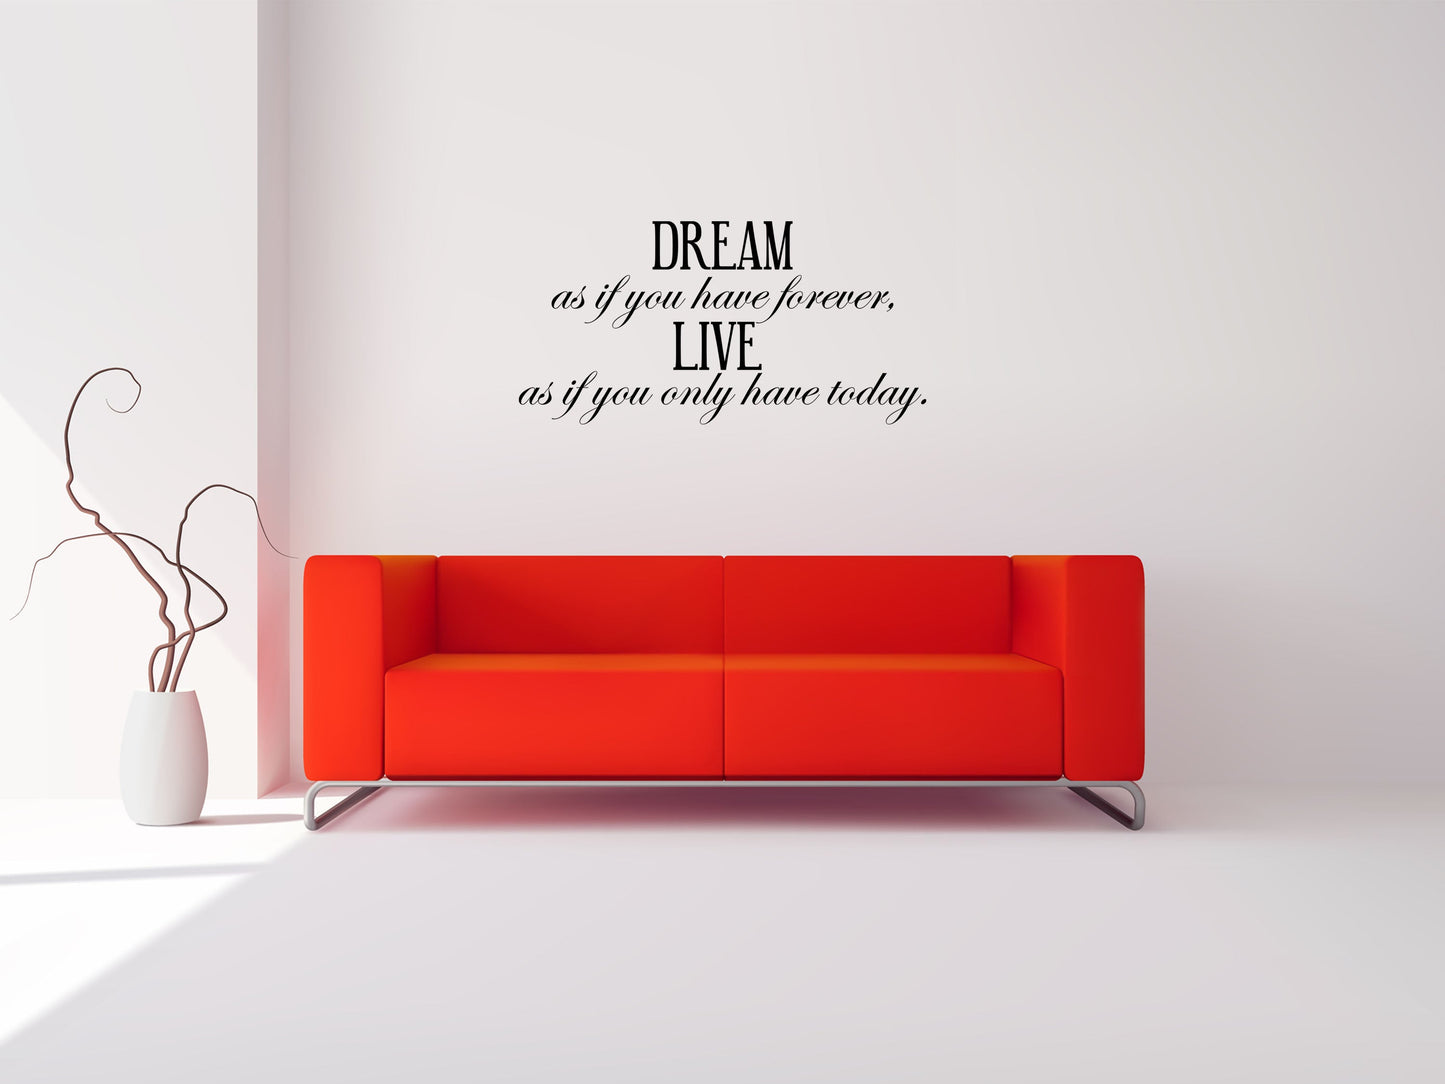 Dream As If You Have Forever - Inspirational Wall Decals Vinyl Wall Decal Inspirational Wall Signs 